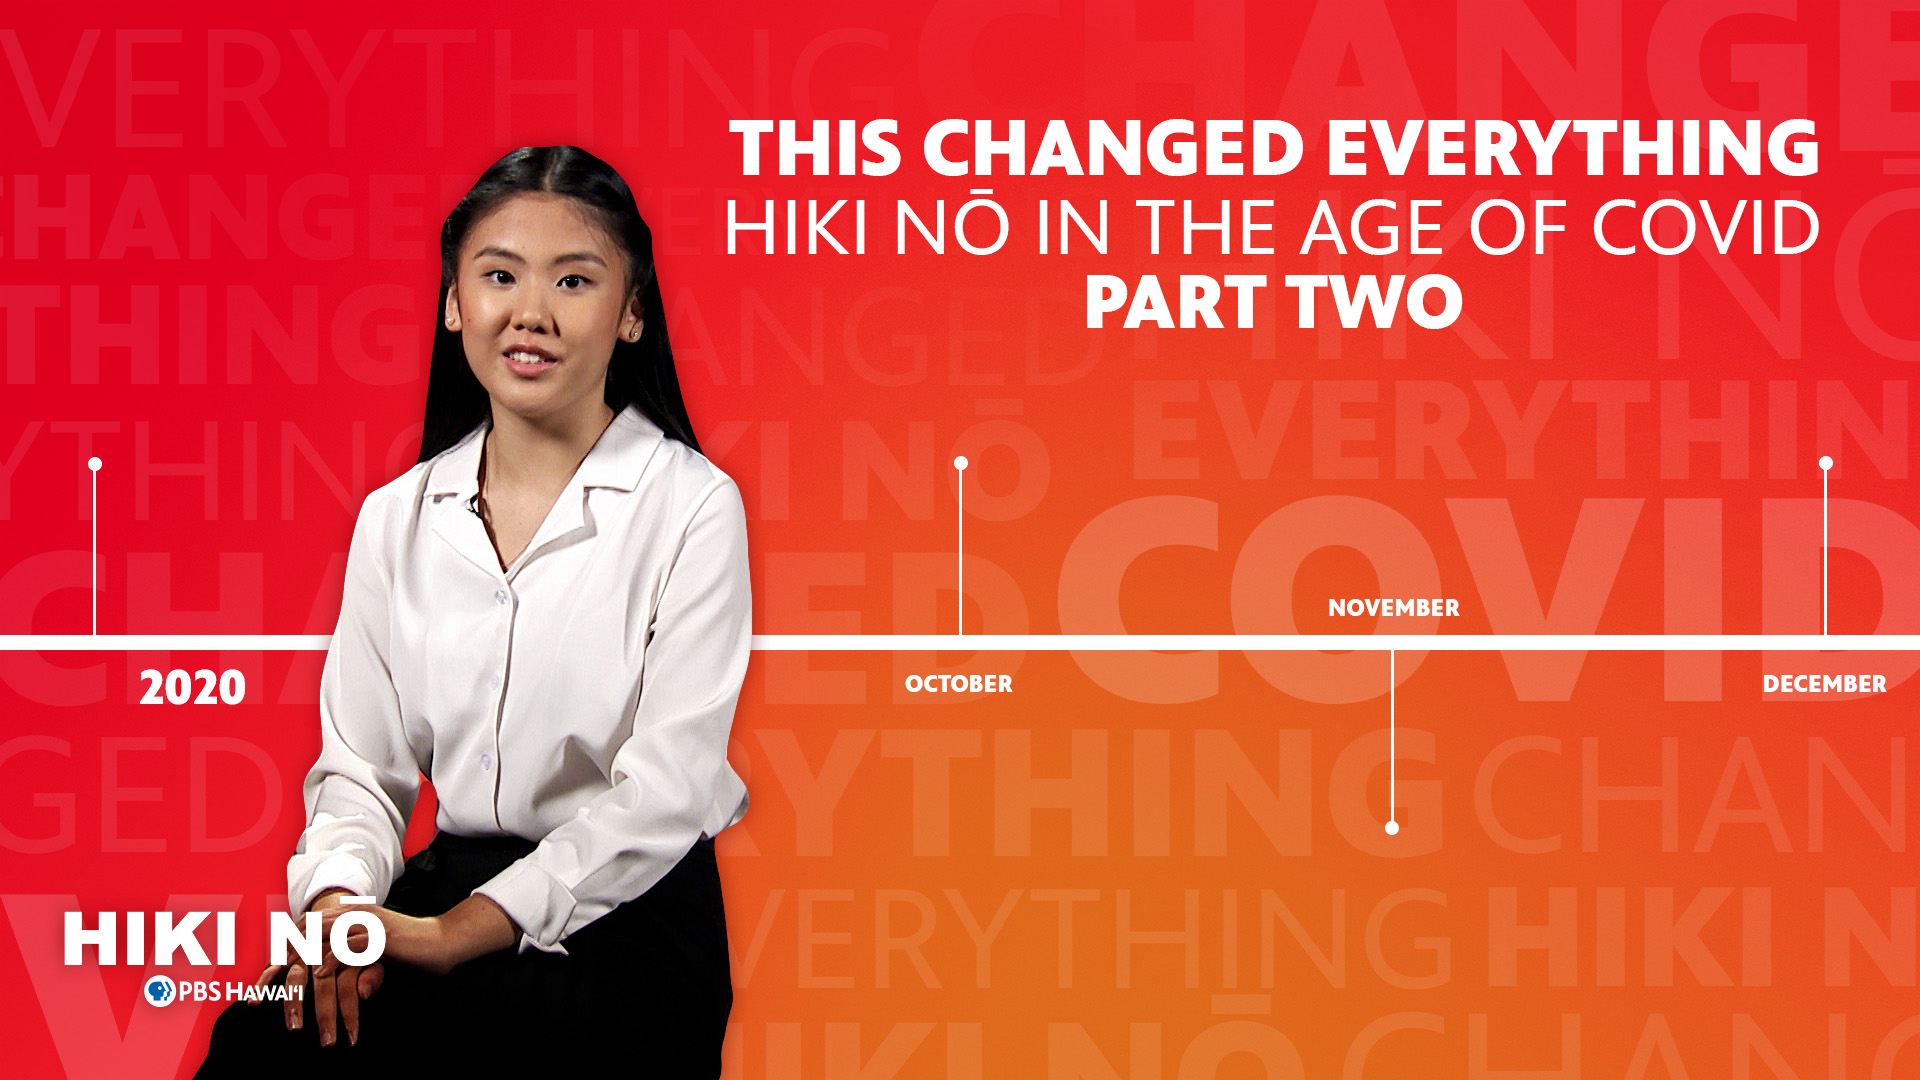 THIS CHANGED EVERYTHING: HIKI NŌ IN THE AGE OF COVID – PART TWO